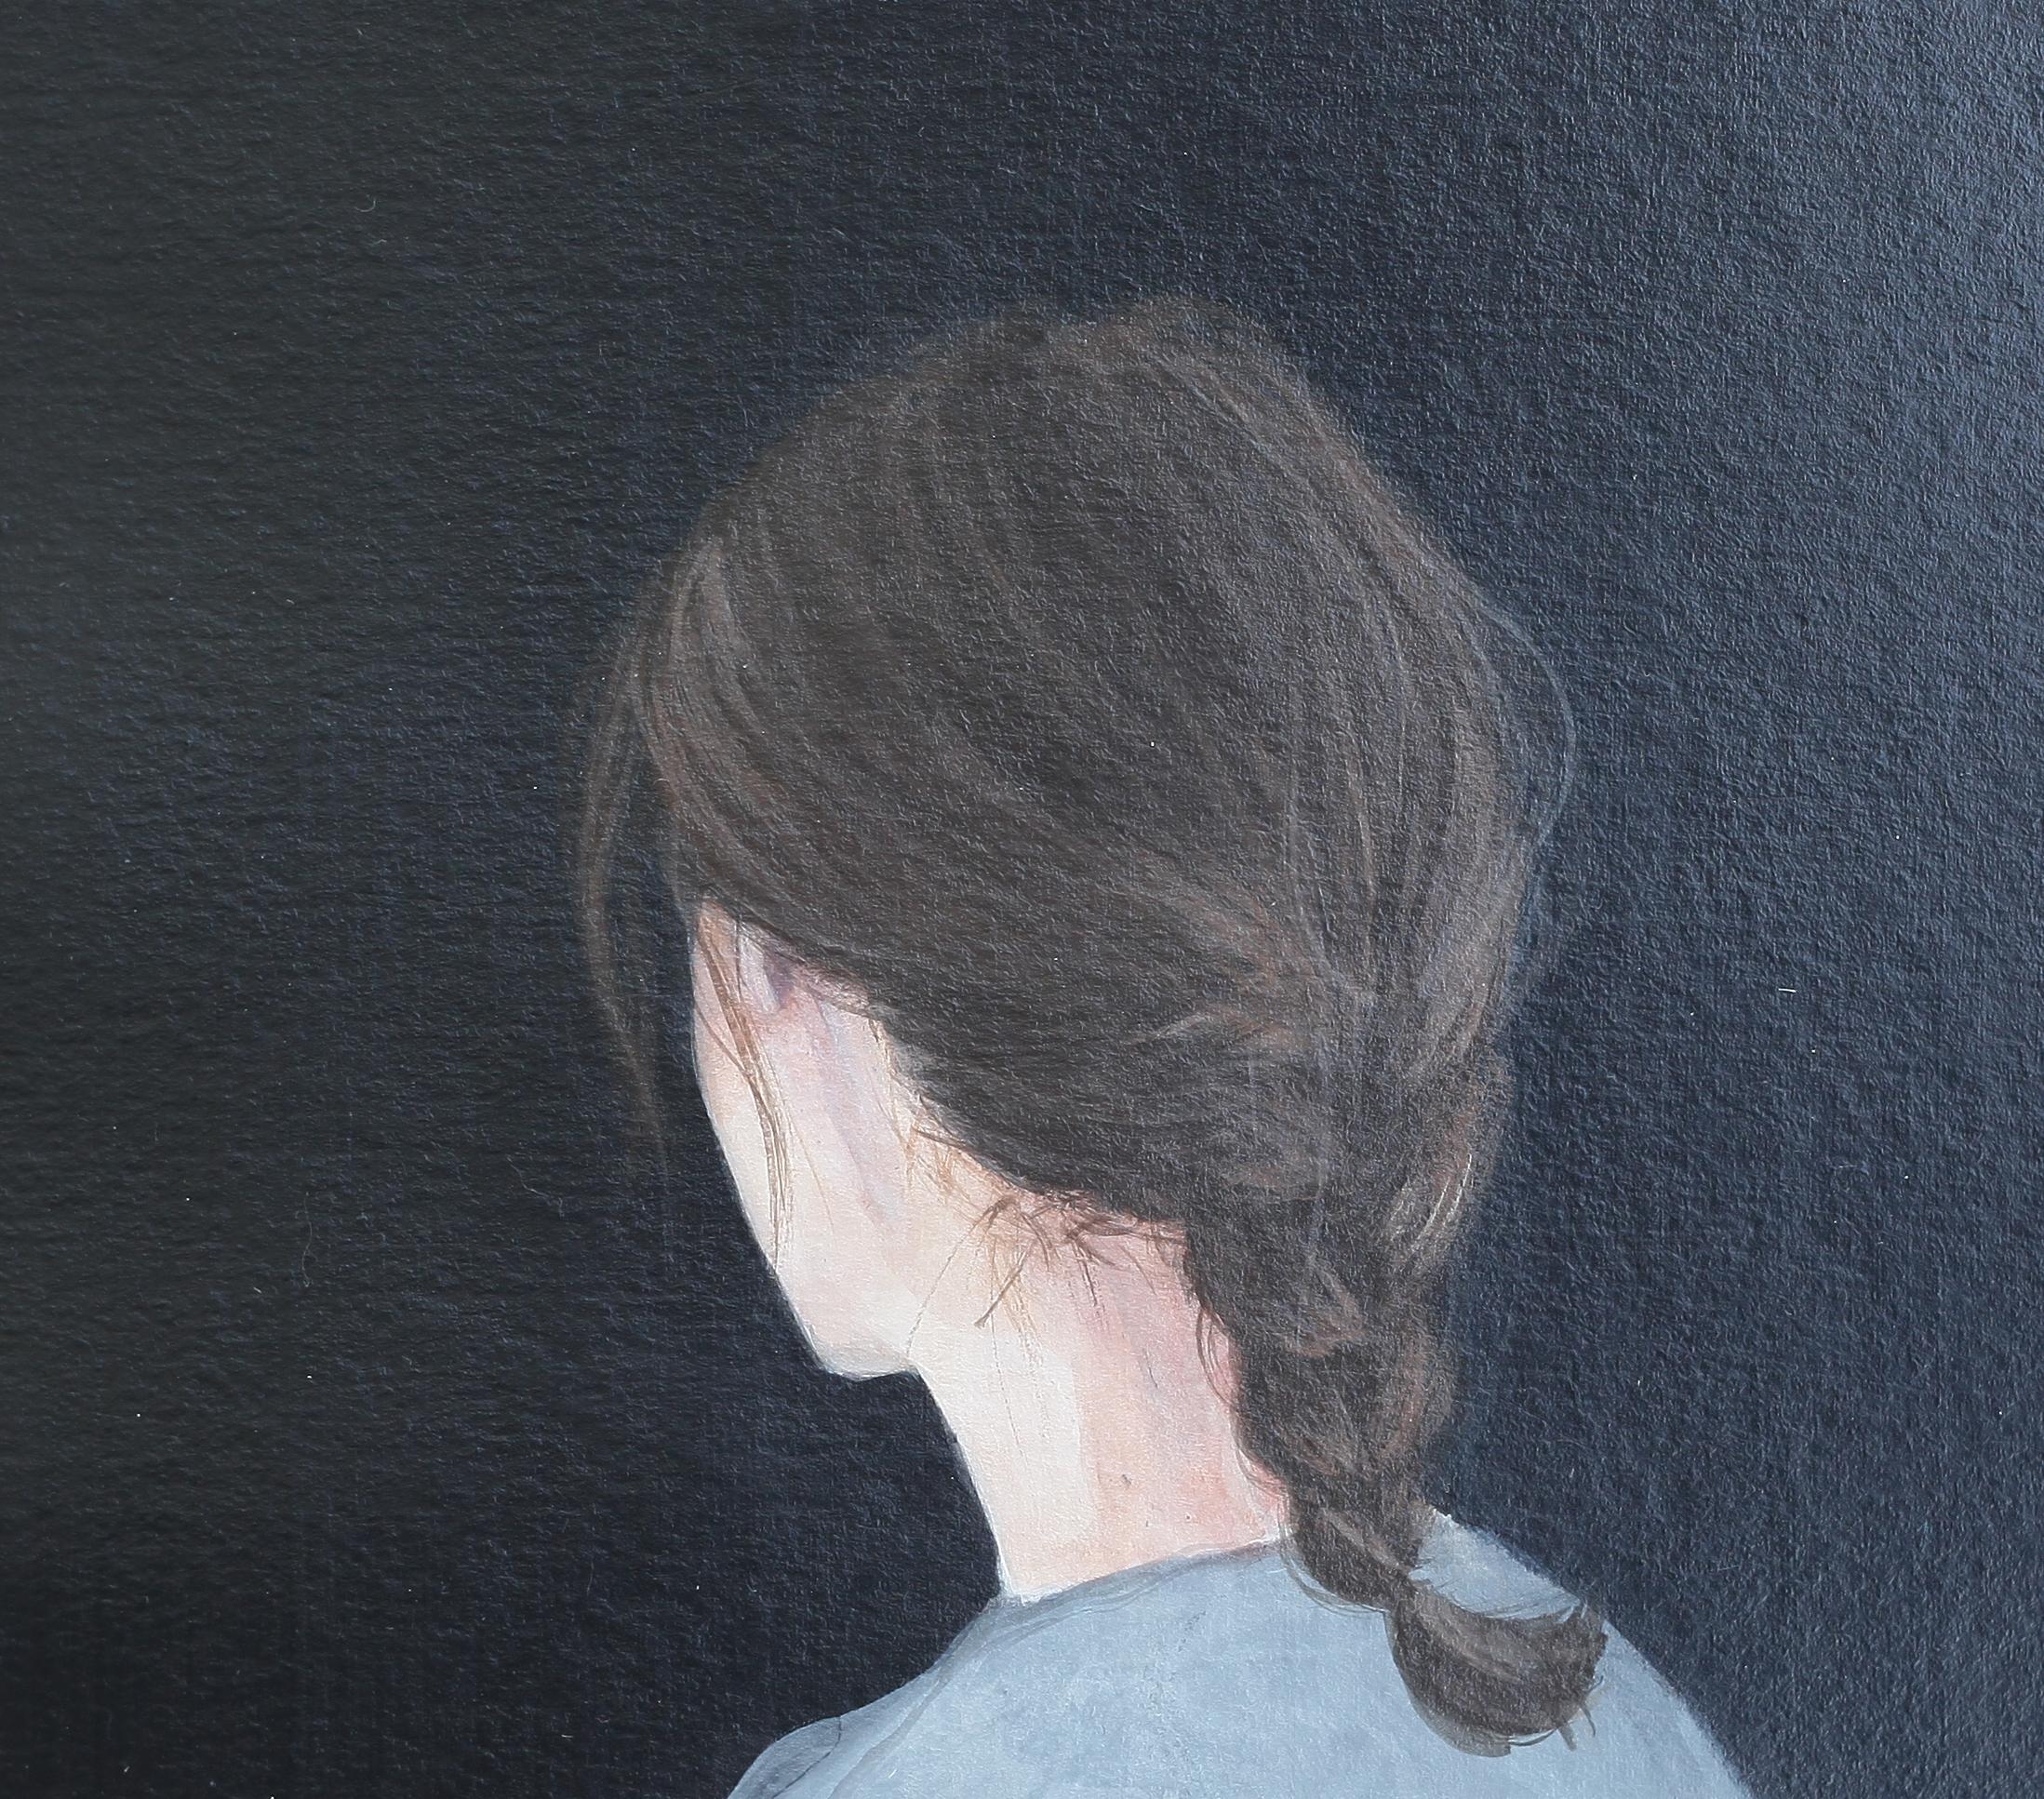 Karoline Kroiß (1975), born in Austria, mainly paints realistic female figures with acrylic paint on paper or canvas.

The women in her work seem to be lost in thought, serene scenes enhanced by the neutral background. We see these women en profile,